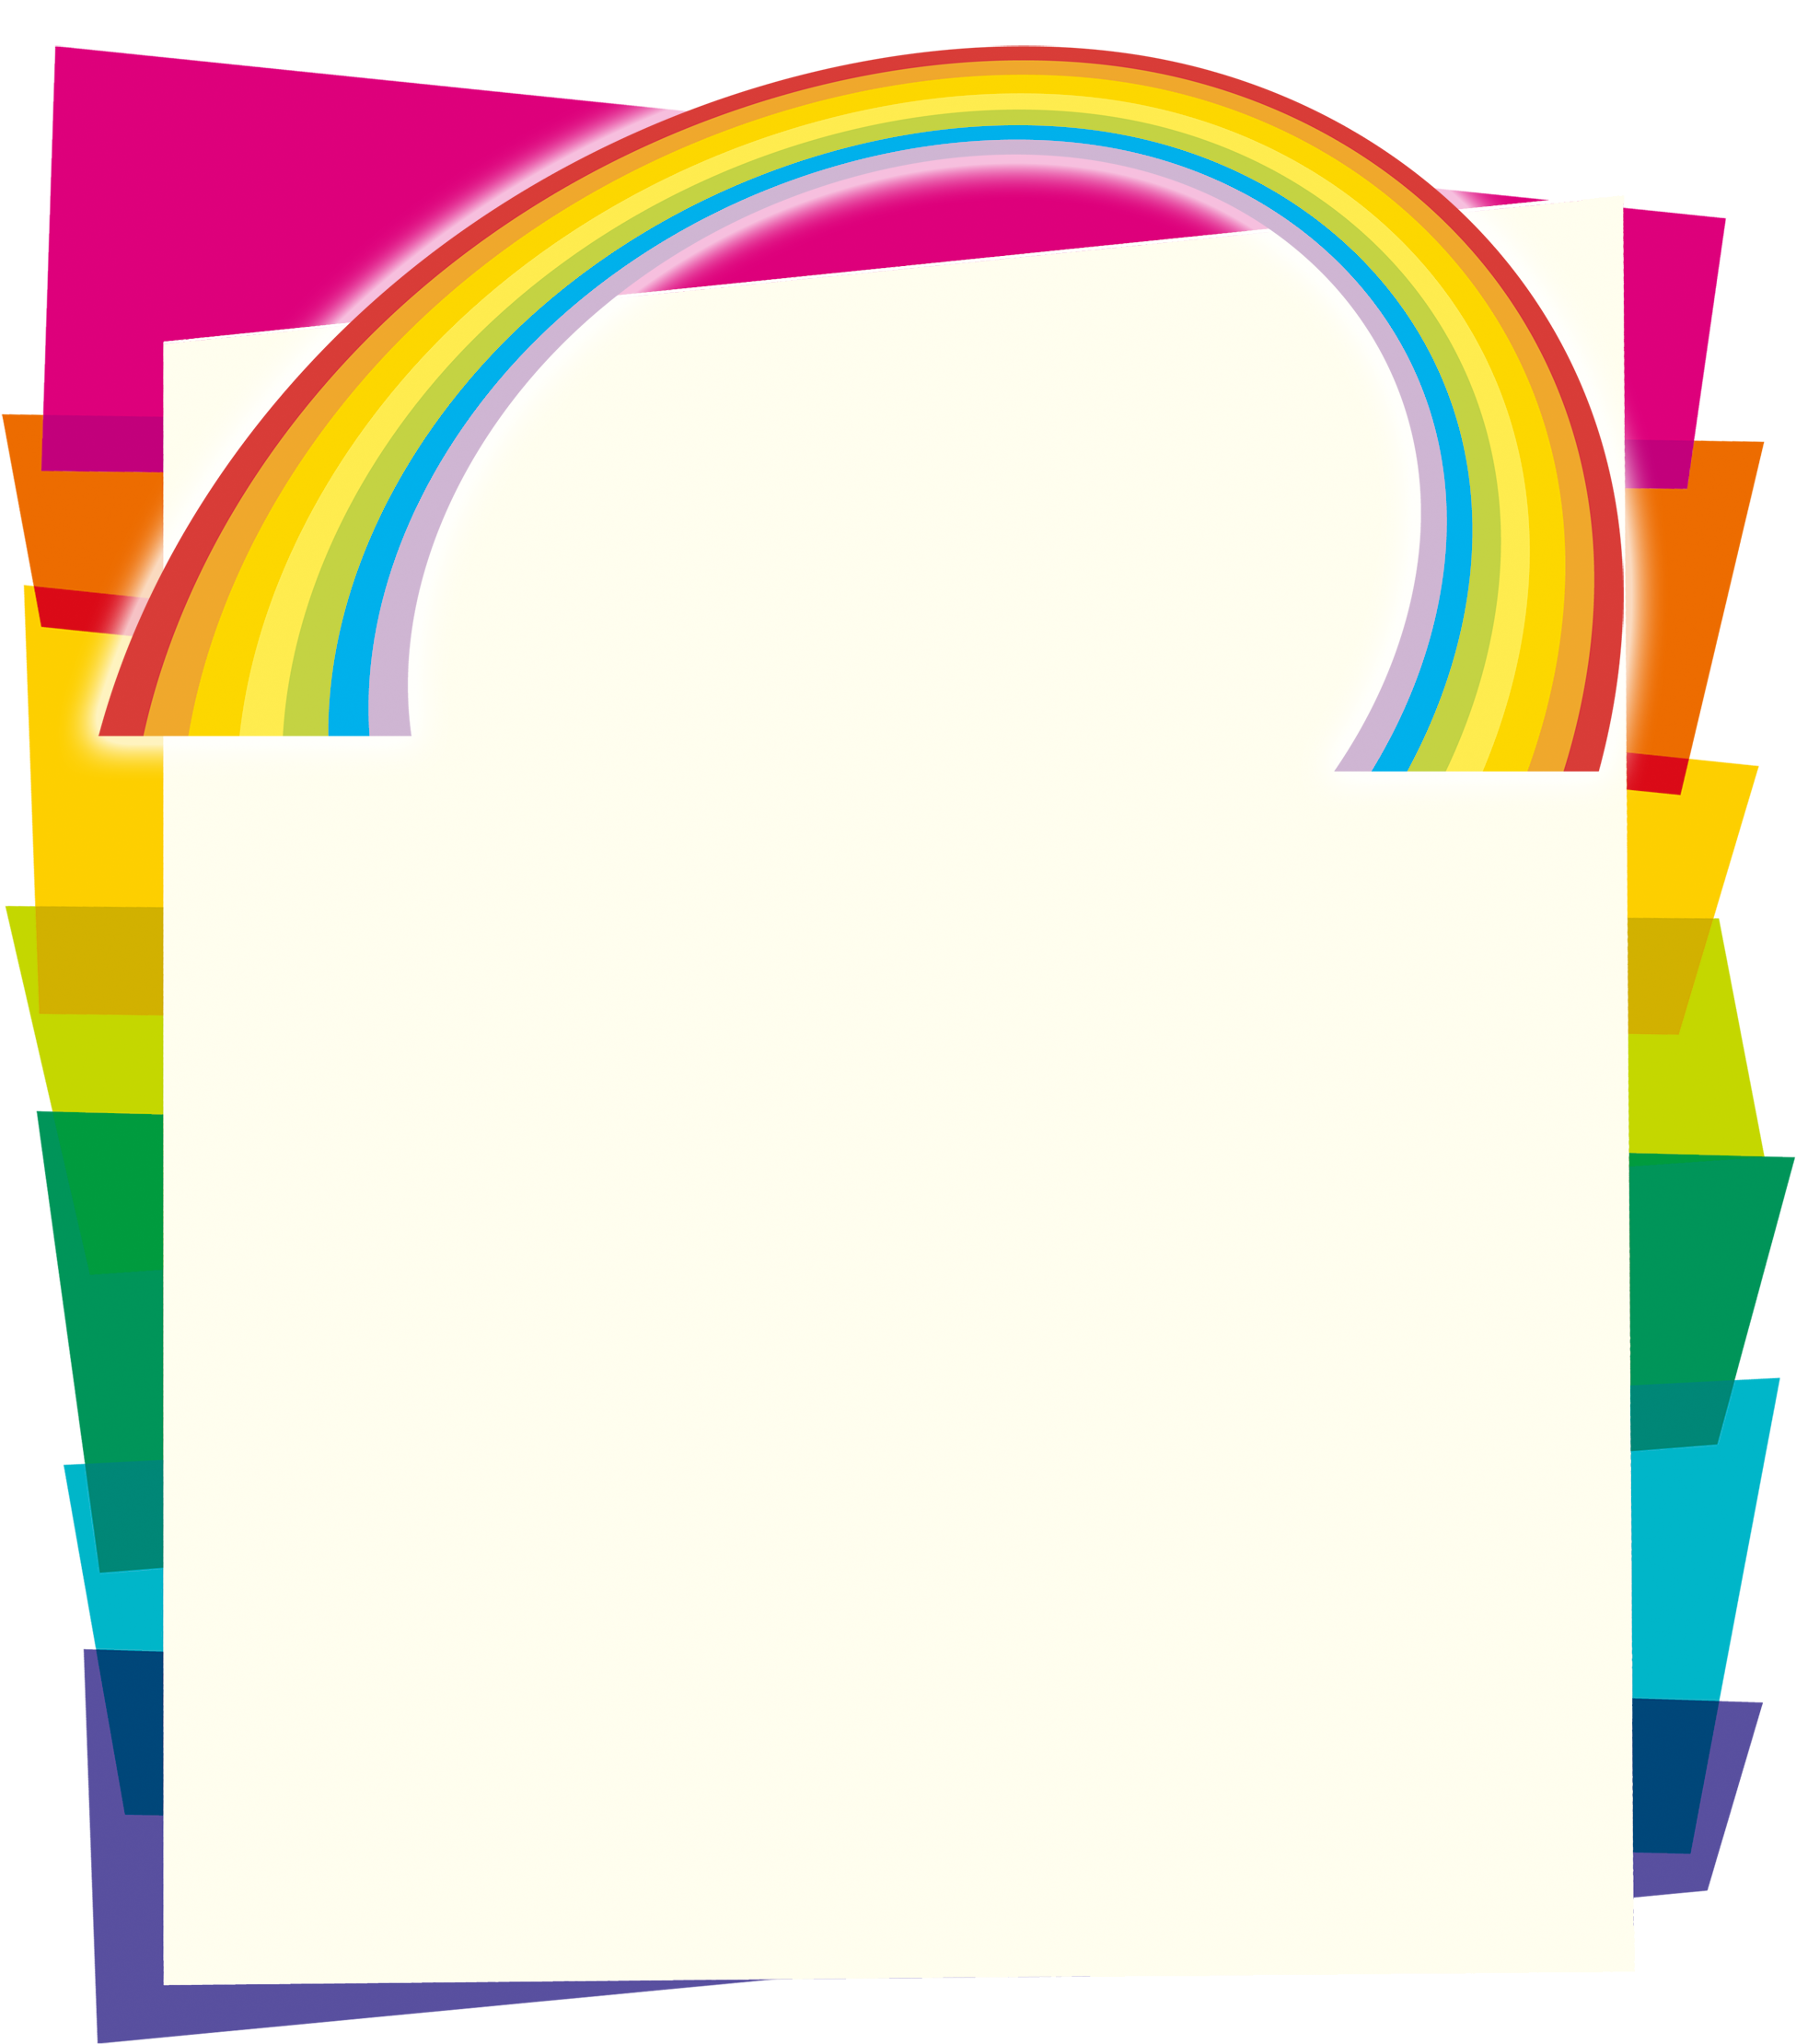 Colorful Rainbow Border Design PNG image